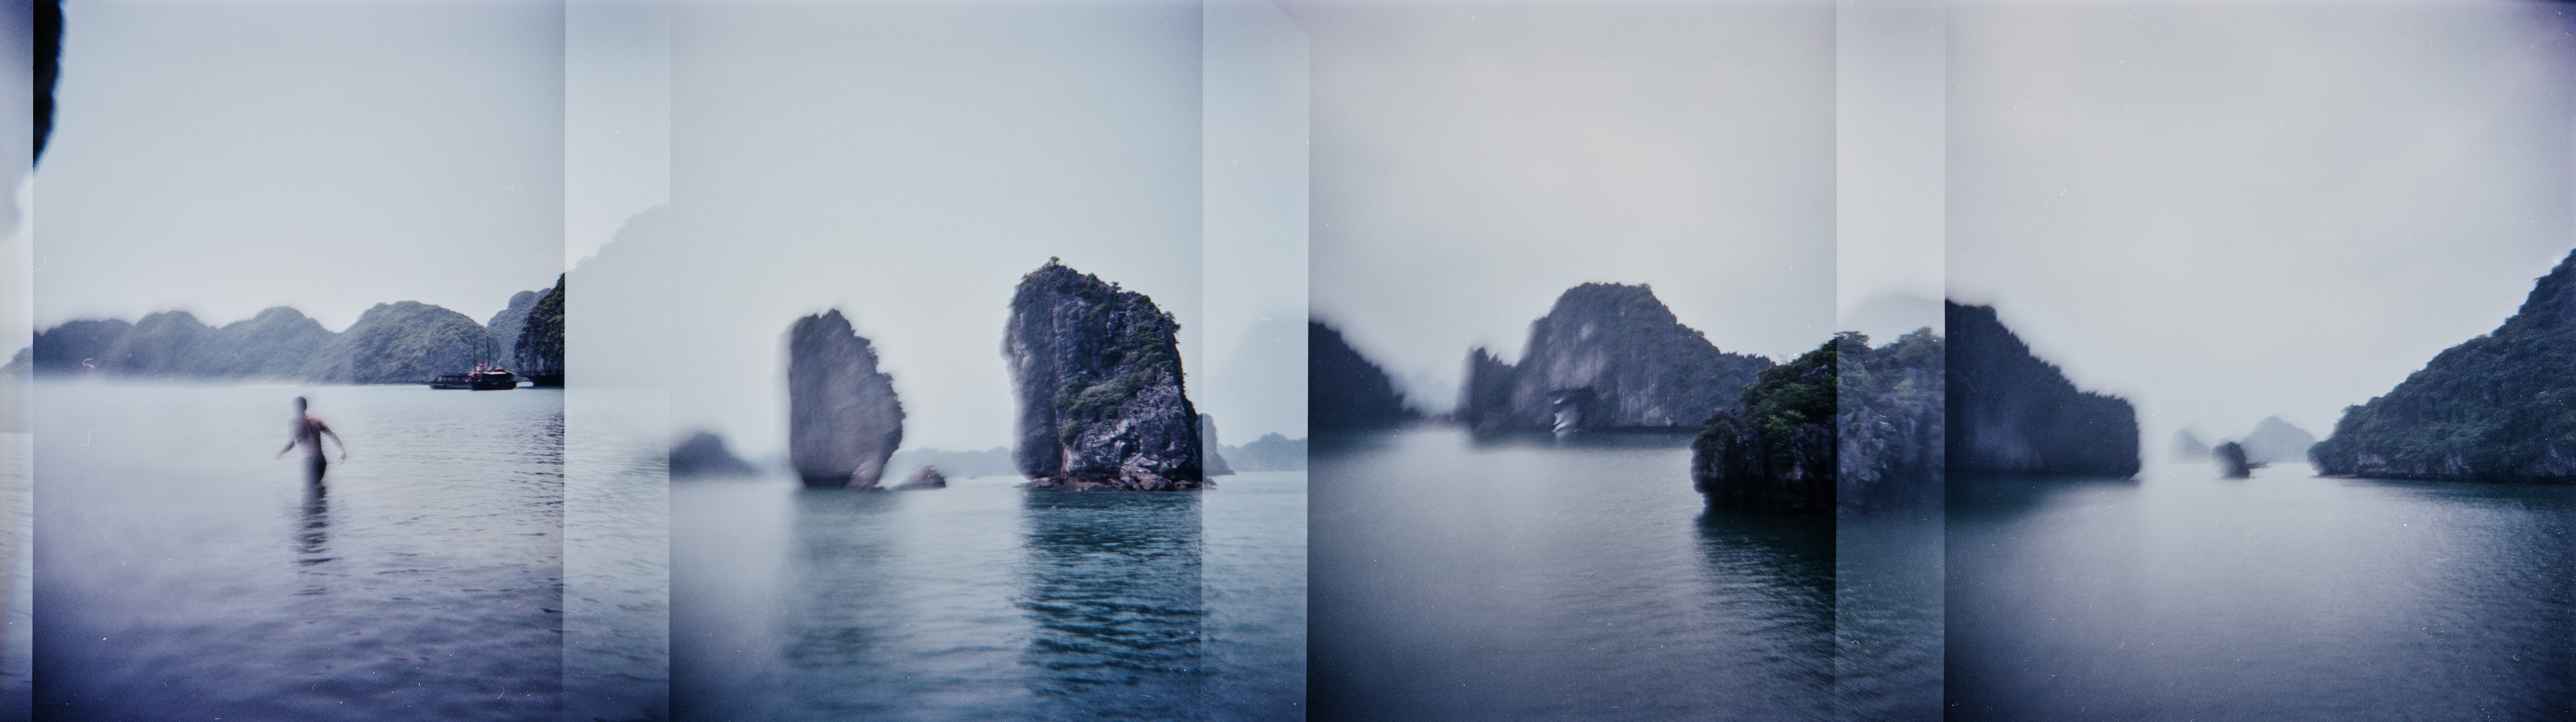 A panorama view of karsts and boats and a man walking in Halong Bay in northern Vietnam.